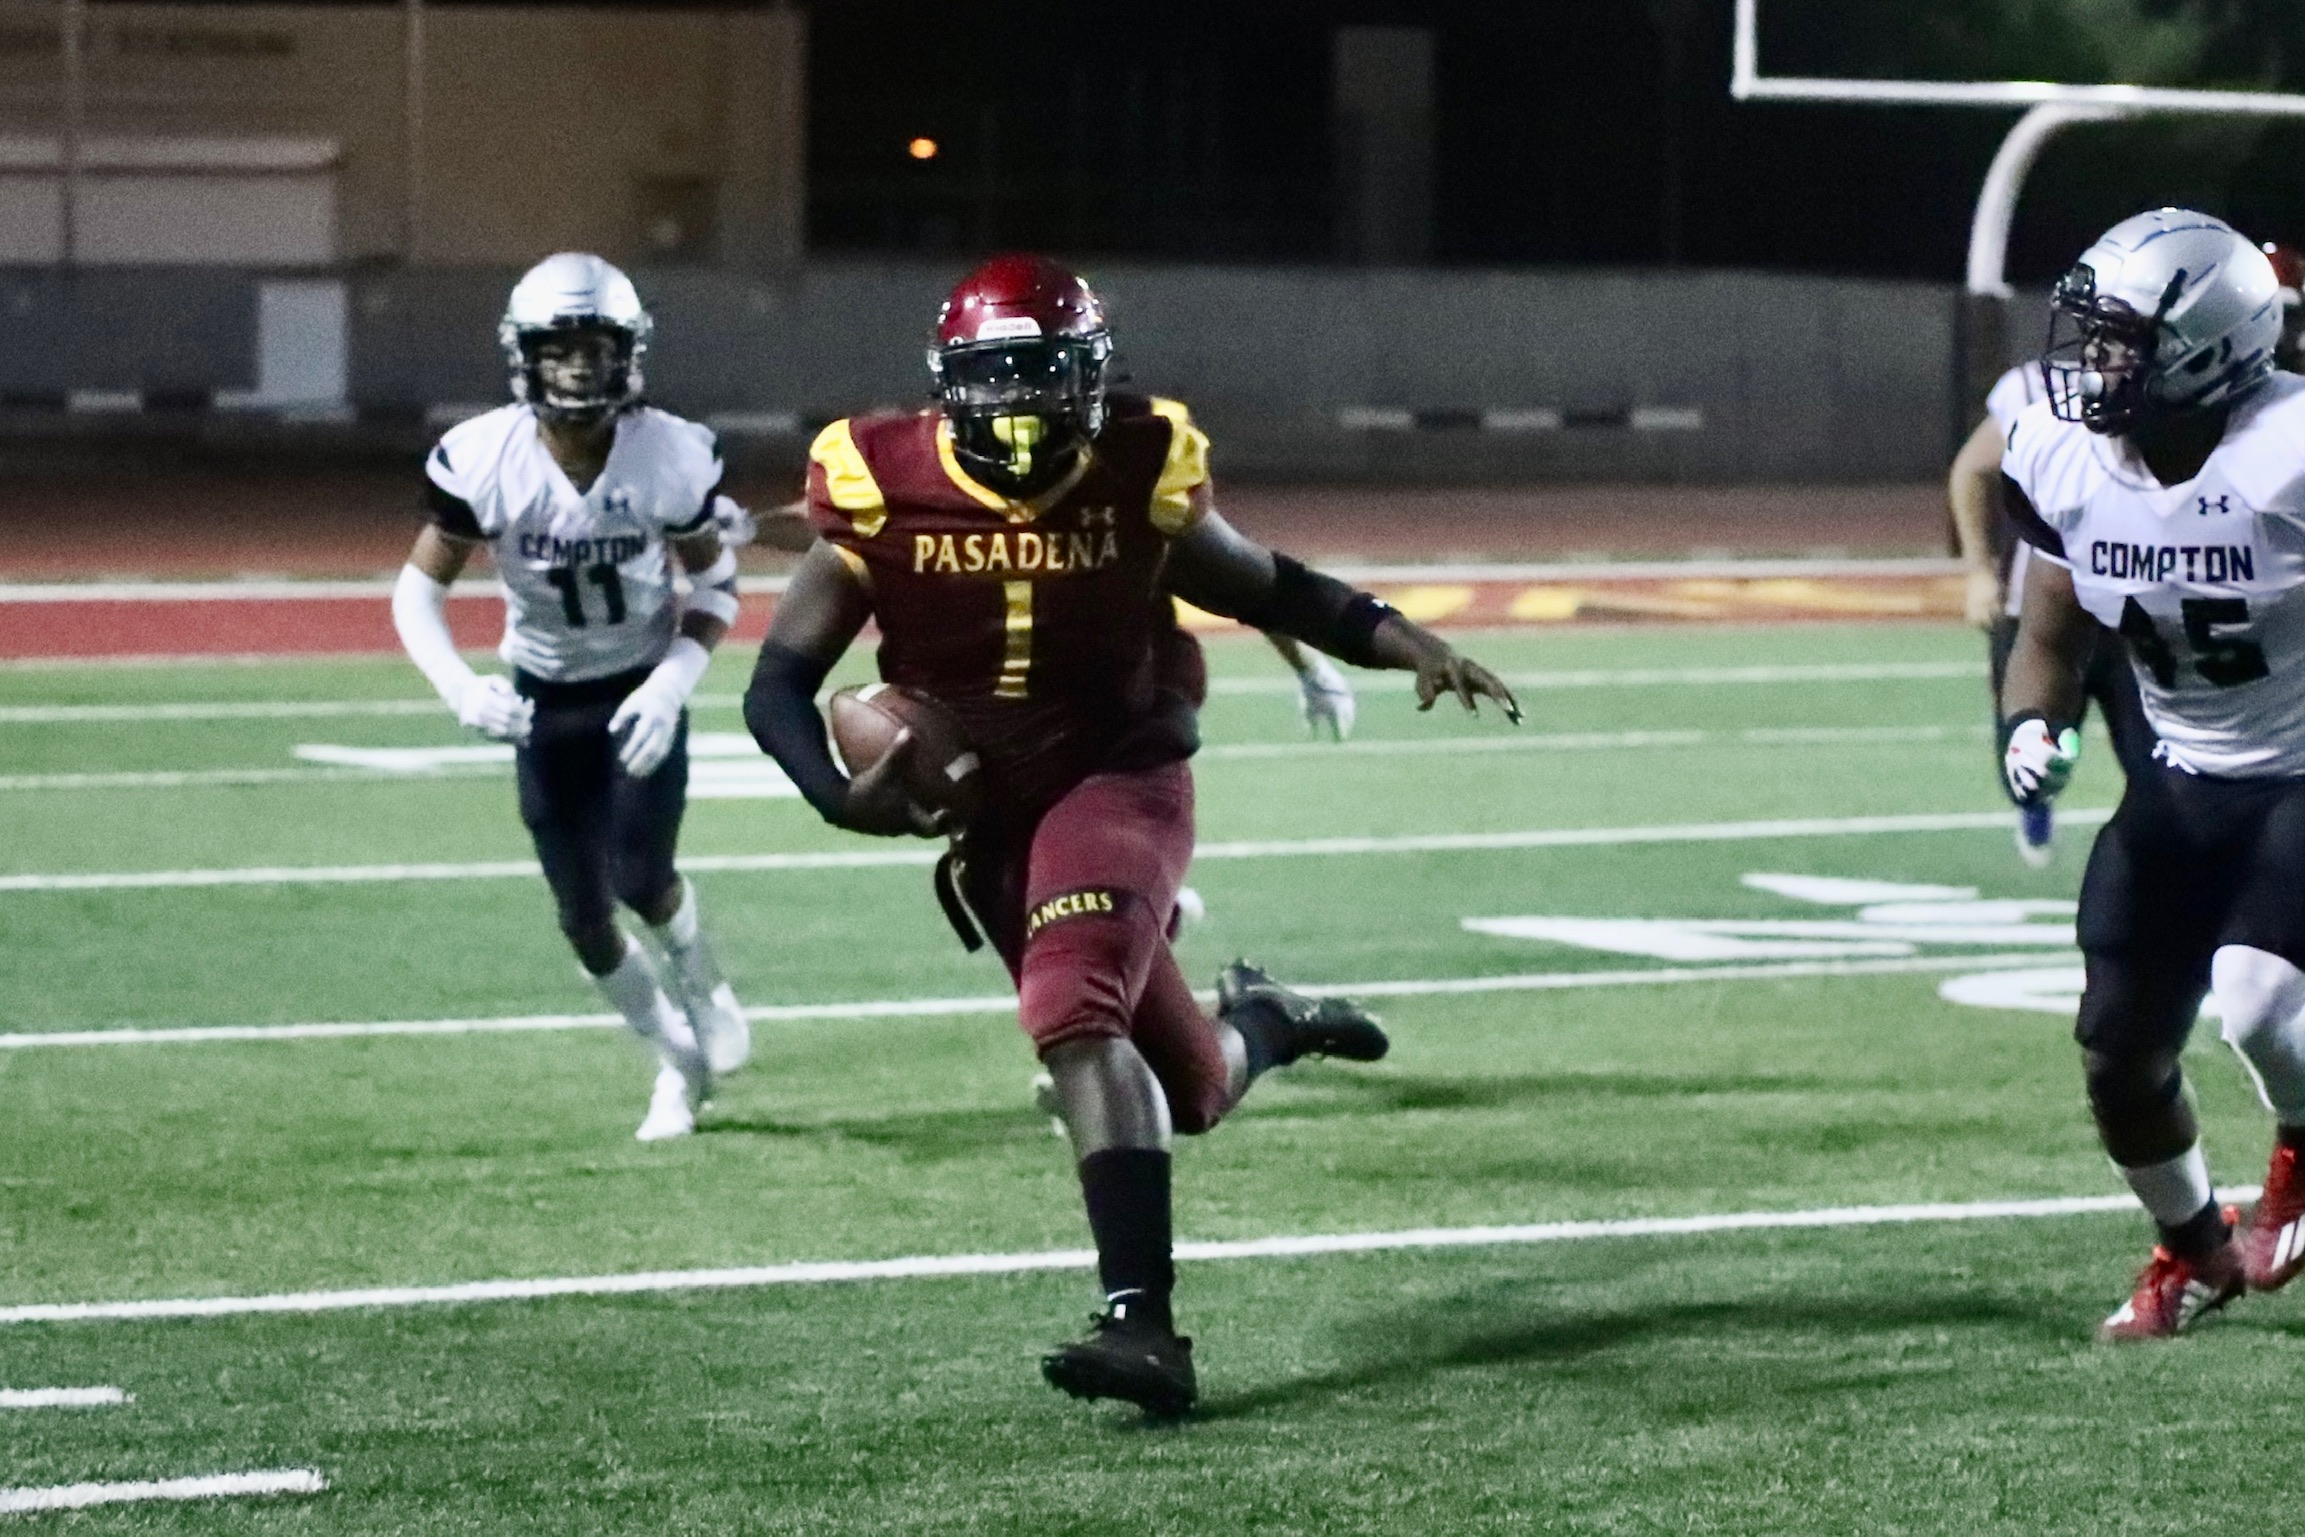 Edward Norton rushed for two touchdowns against Compton at Robinson Stadium Saturday evening (photo by Michael Watkins).